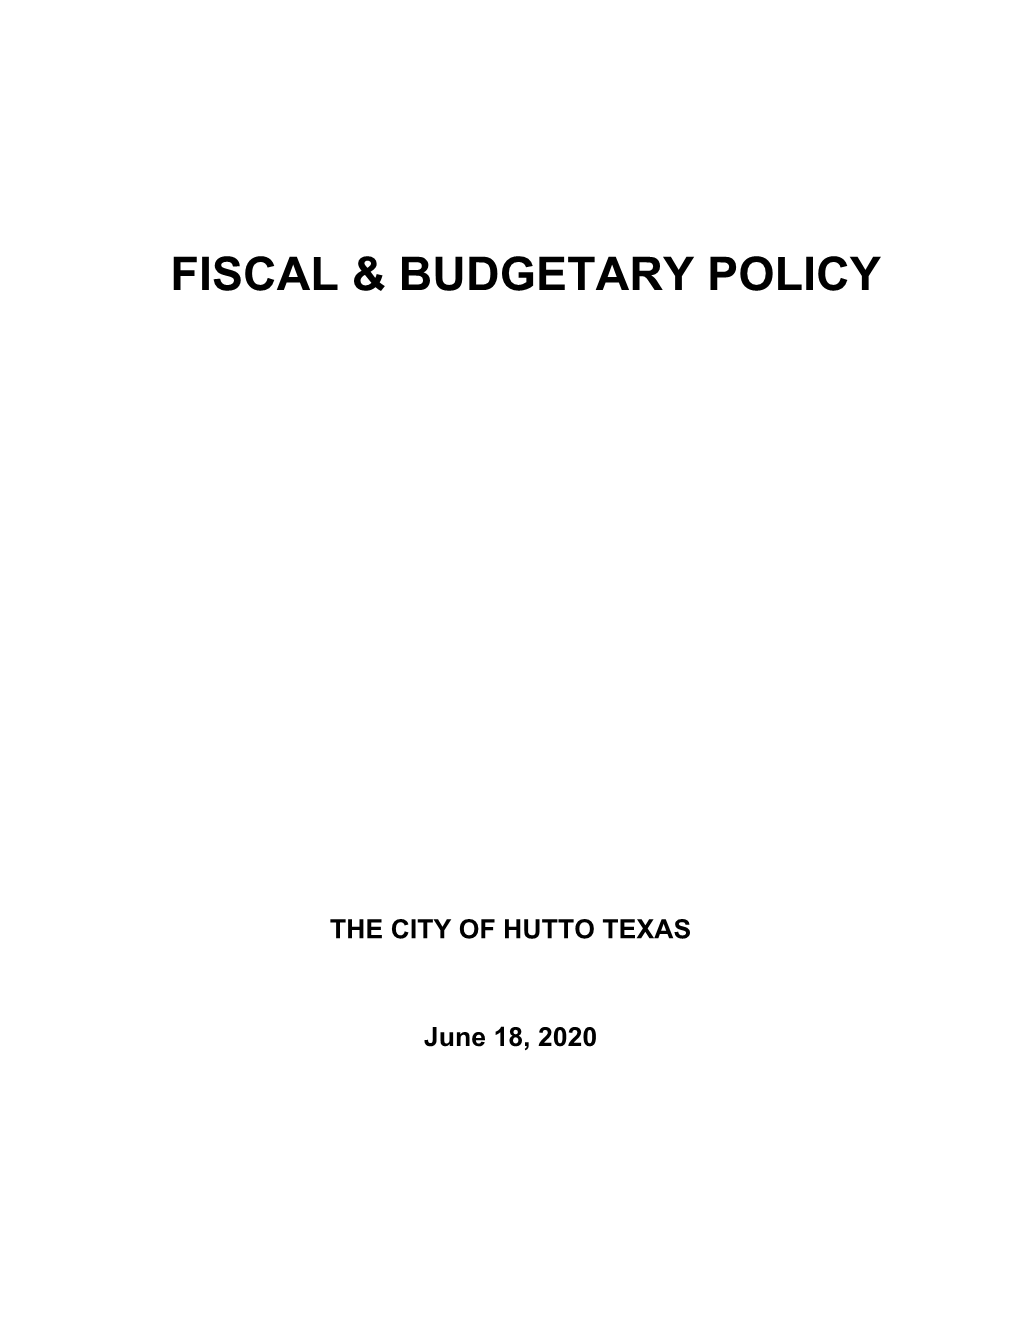 Fiscal & Budgetary Policy